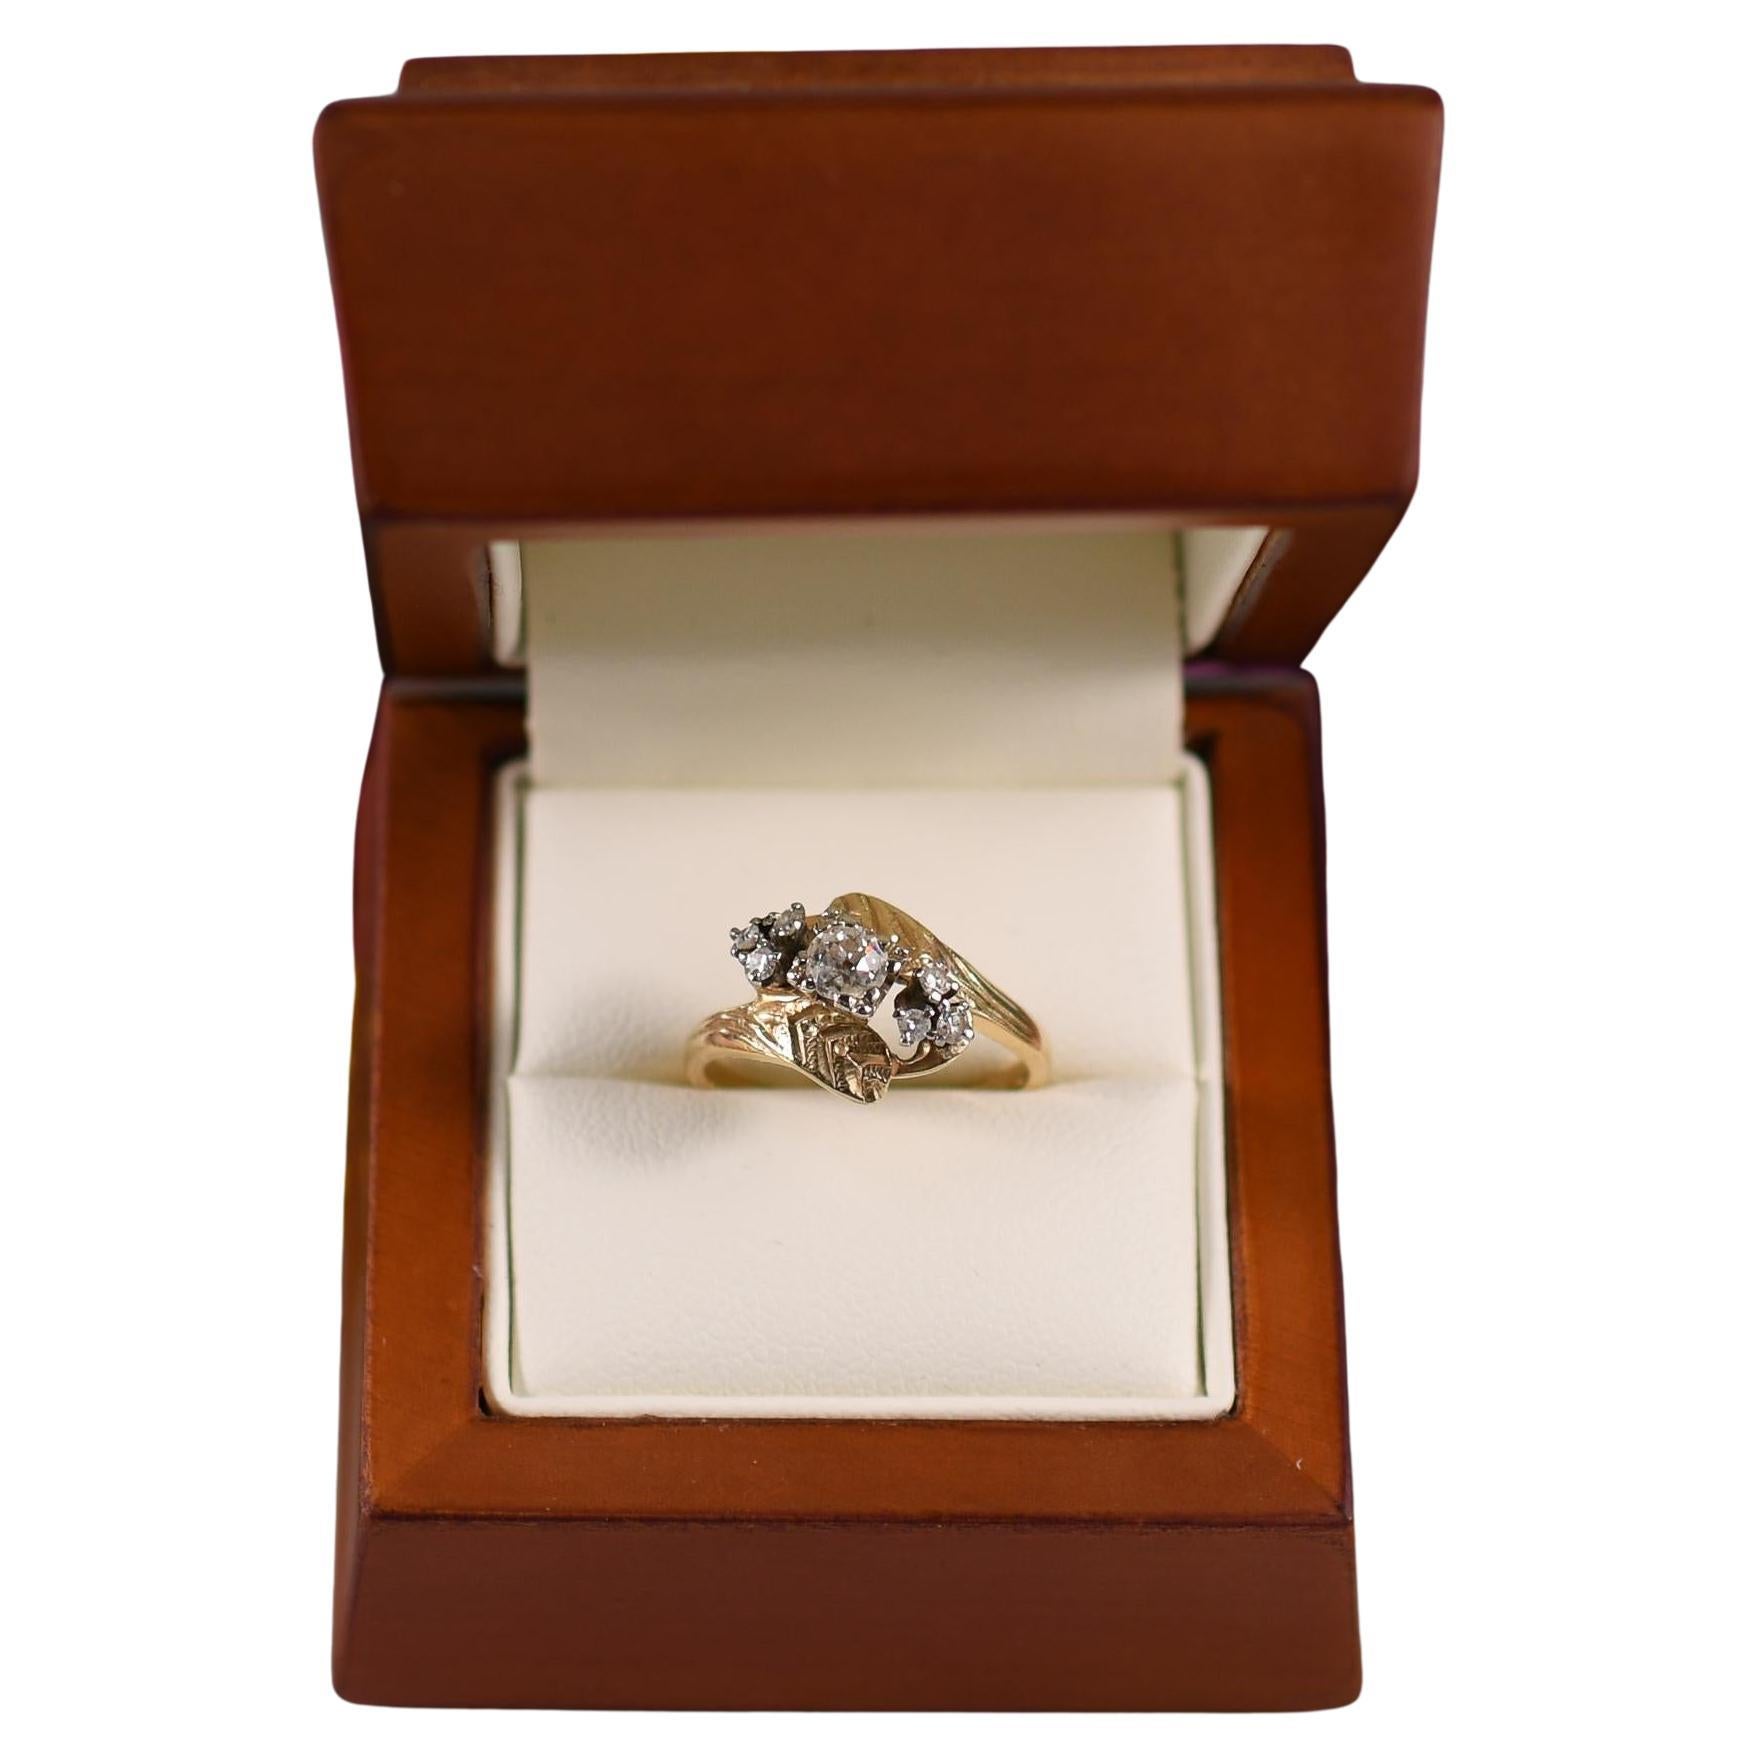 Vintage Bypass Diamond Ring .33ct Old Euro Cut Center Diamond For Sale